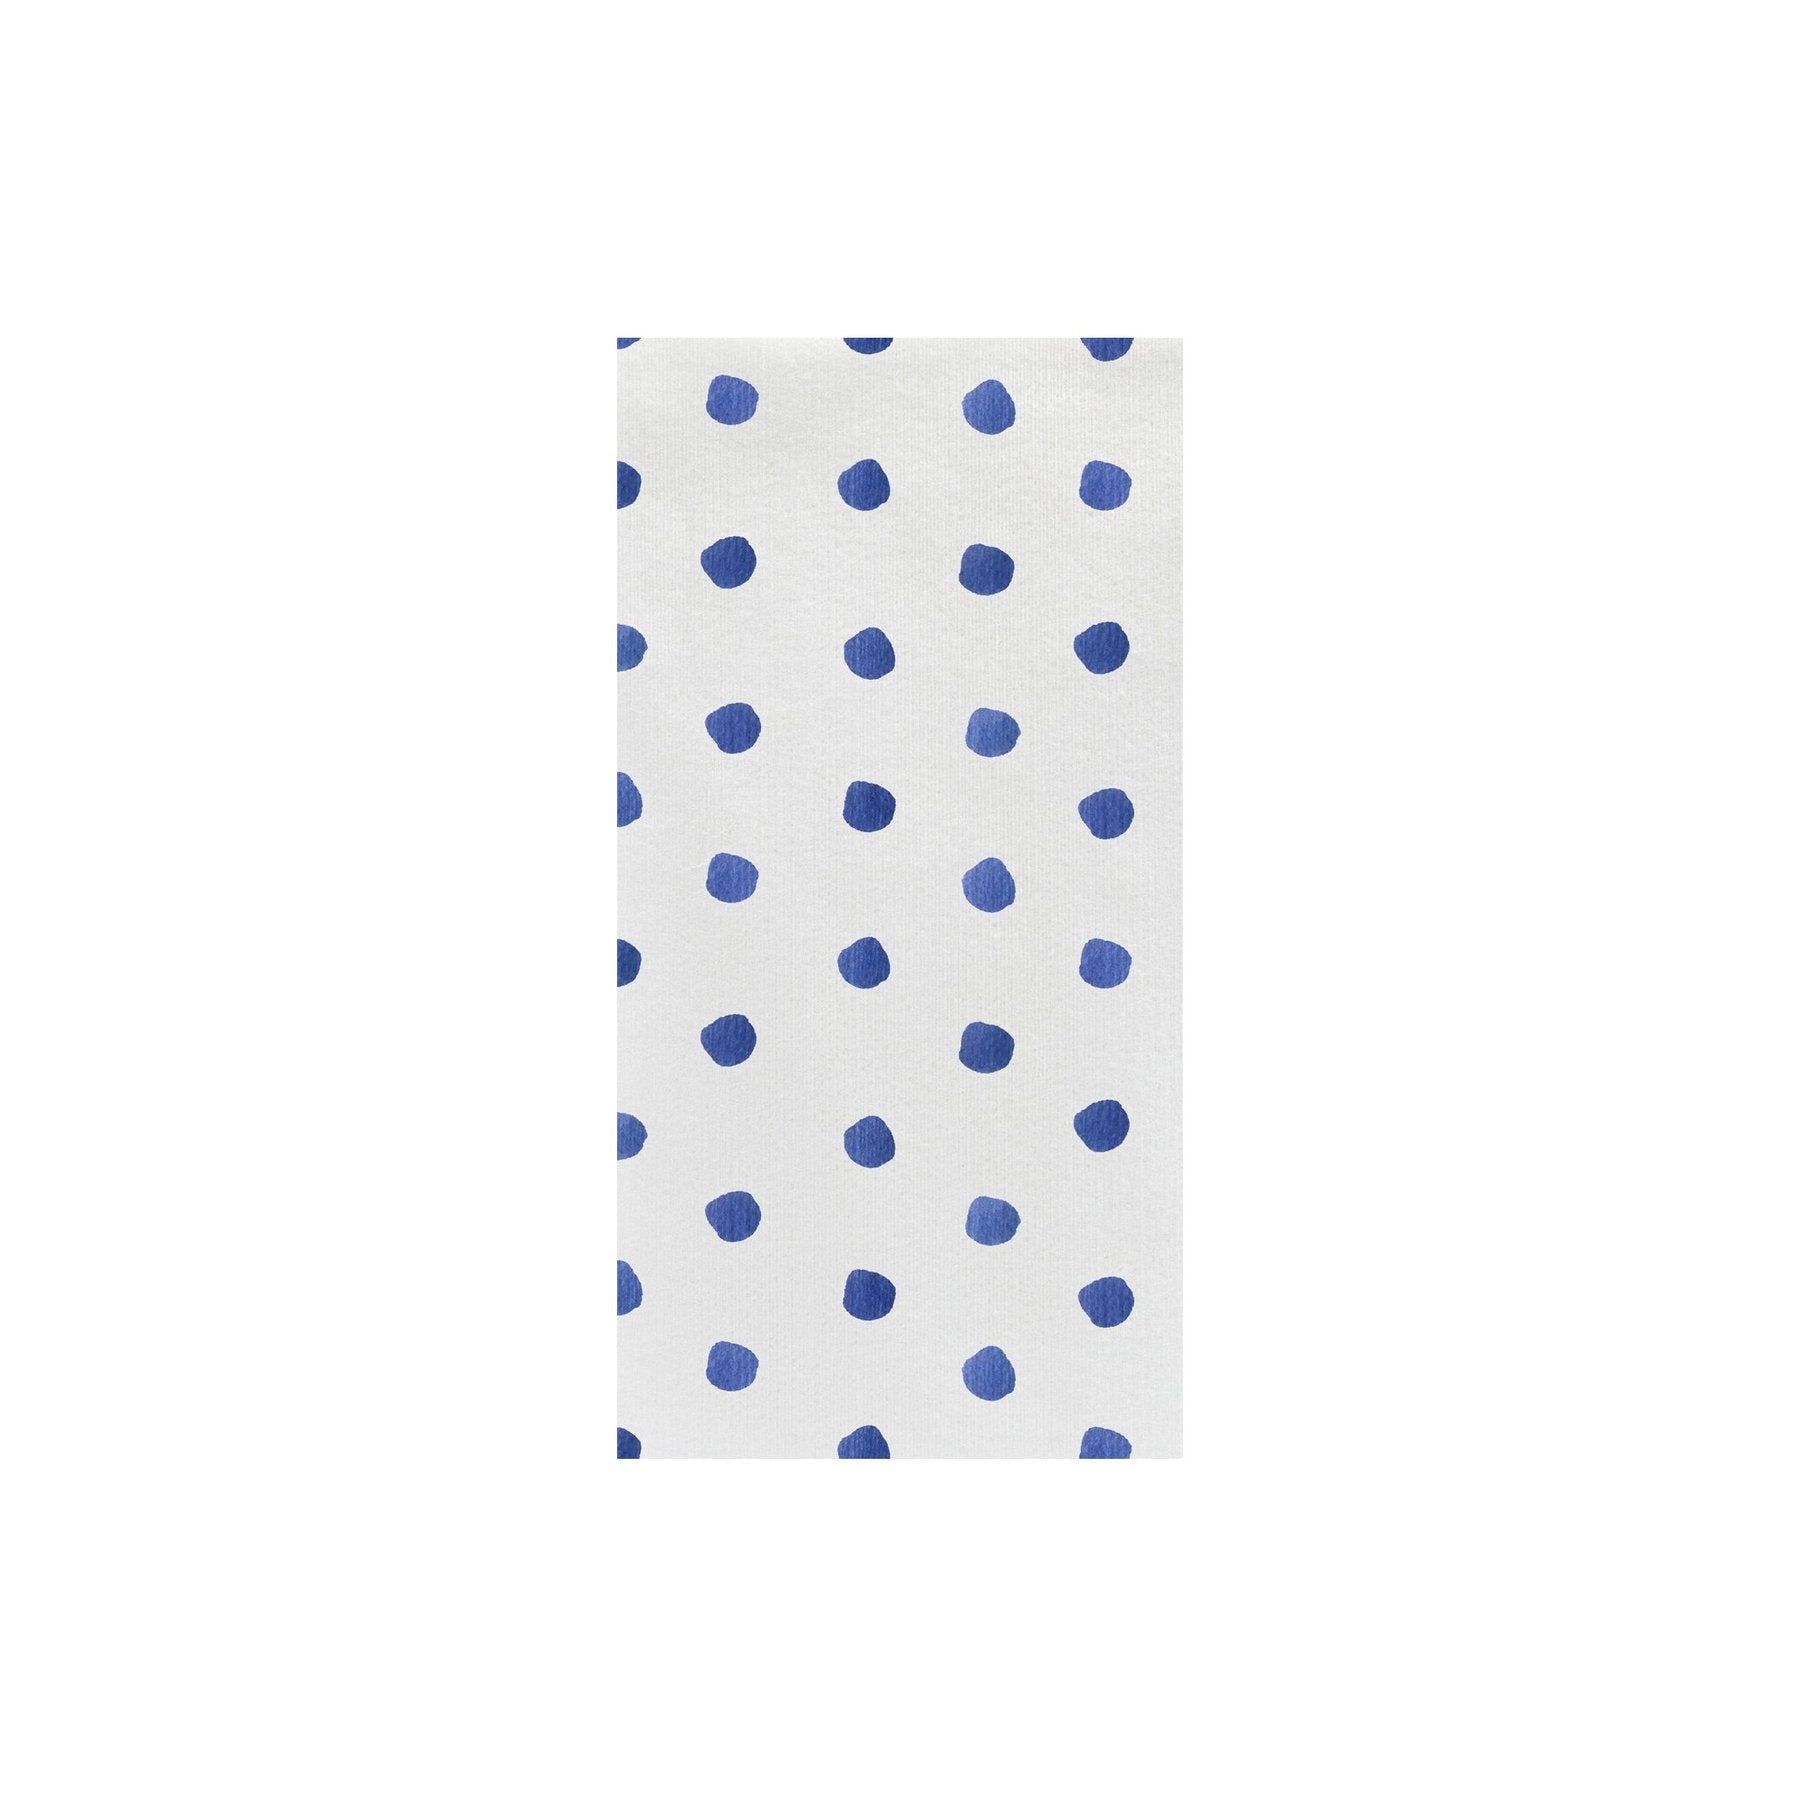 Papersoft Napkins Dot Blue Guest Towels (Pack of 20) Home Decor Vietri   